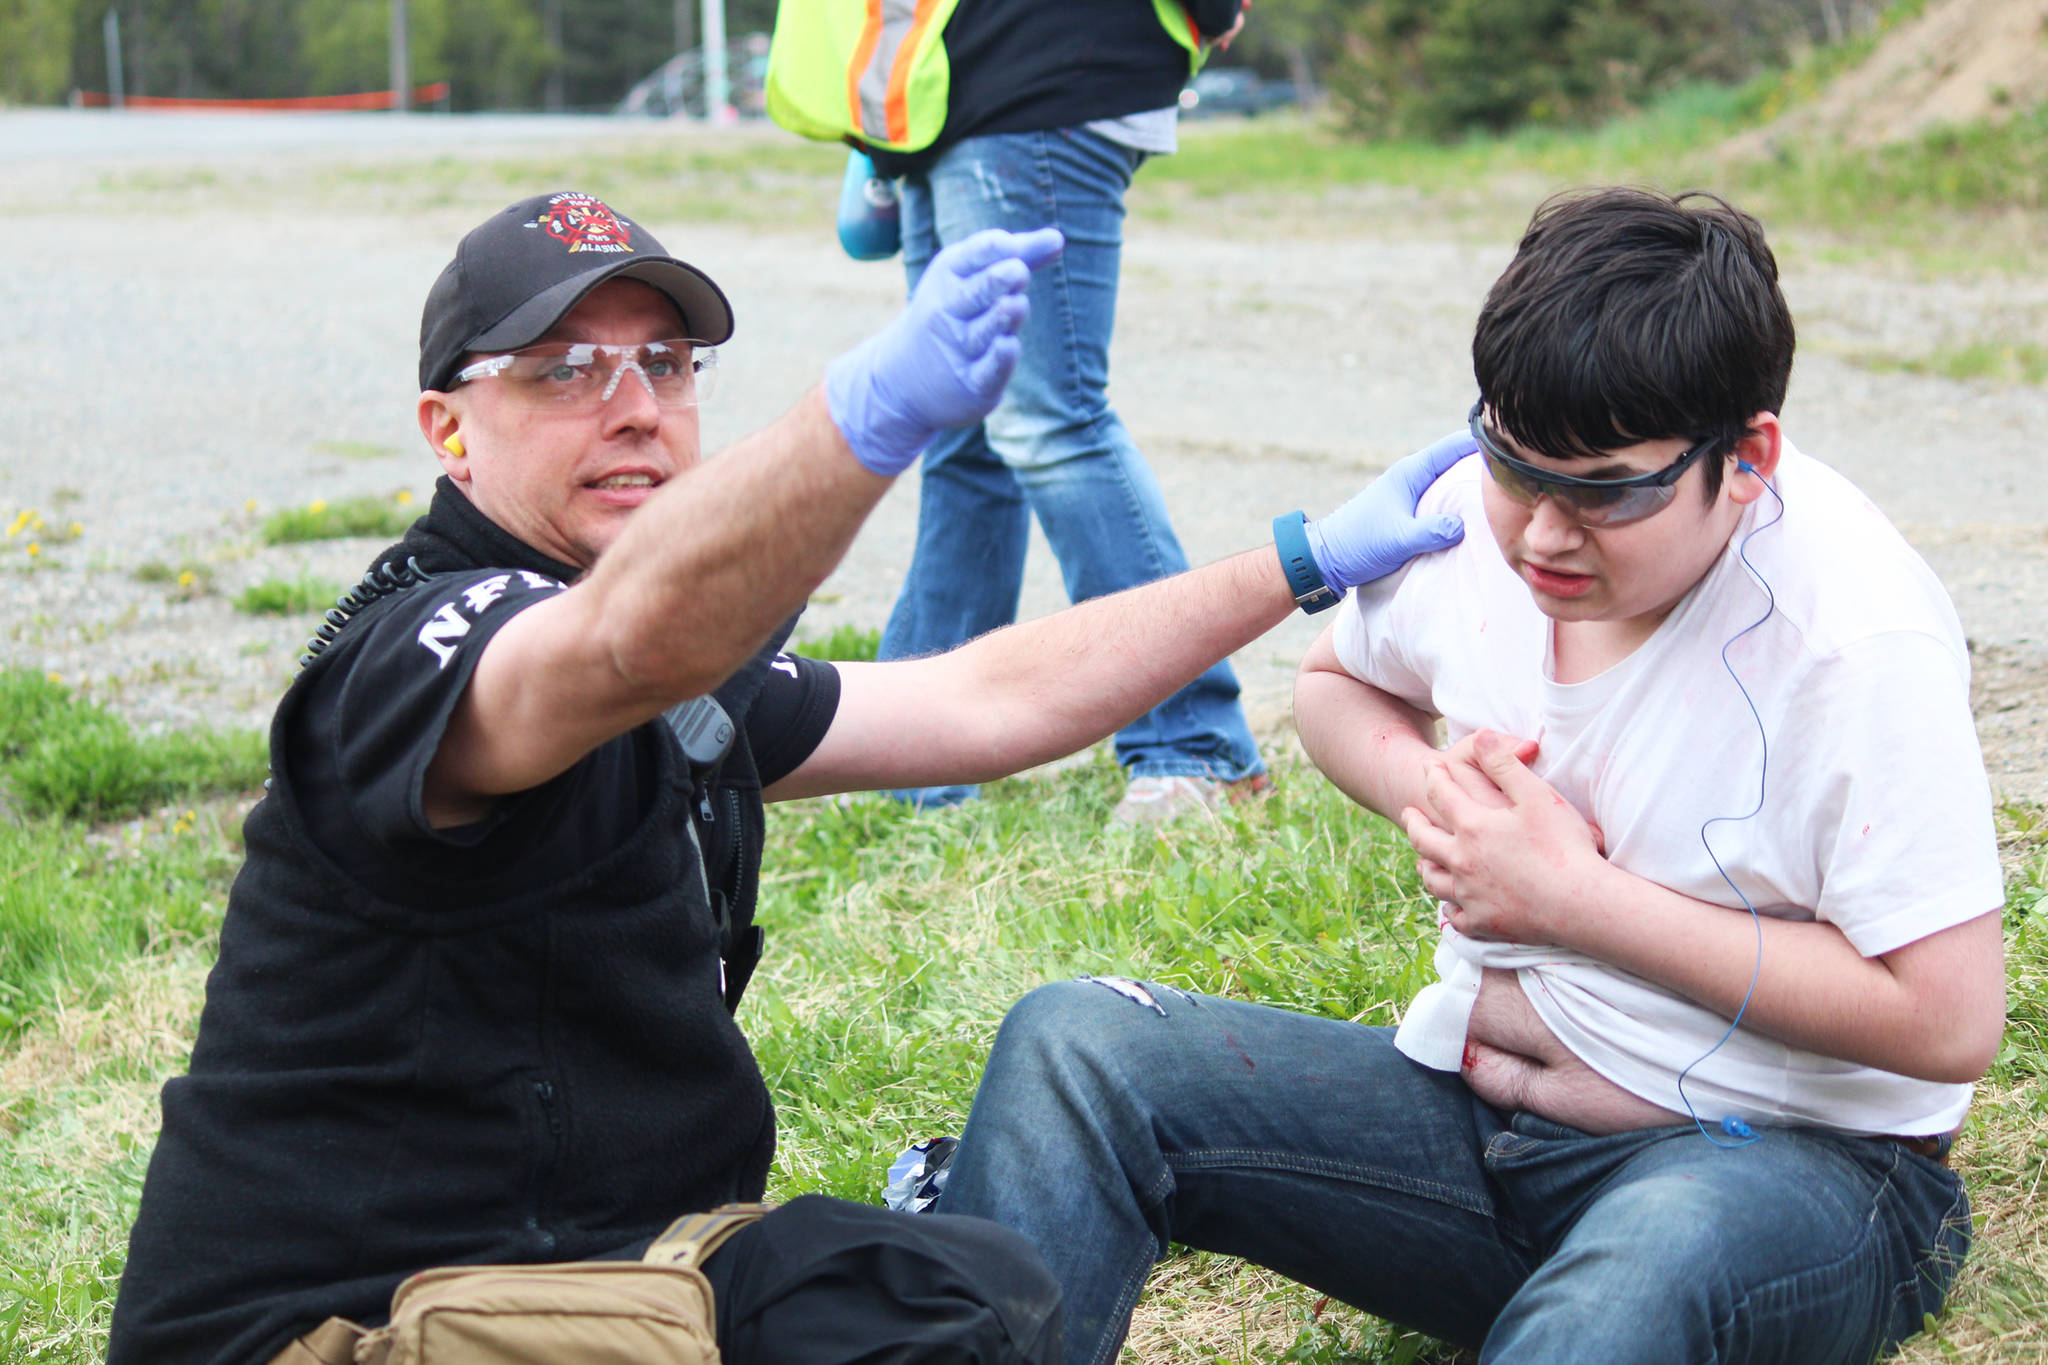 A member of the Nikiski Fire Department directs his fellow teammates while tending to the fake injuries of 14-year-old Petie Deveer during a simulated meth lab explosion Saturday, May 20, 2017 at the North Peninsula Recreation Center in Nikiski, Alaska. Several members of Kenai Peninsula law enforcement agencies and emergency medical service organizations have been taking a multi-day course focused on working together on violent calls from Las Vegas-based JTM Training Group, which culminated in Saturday’s emergency drills. (Megan Pacer/Peninsula Clarion)